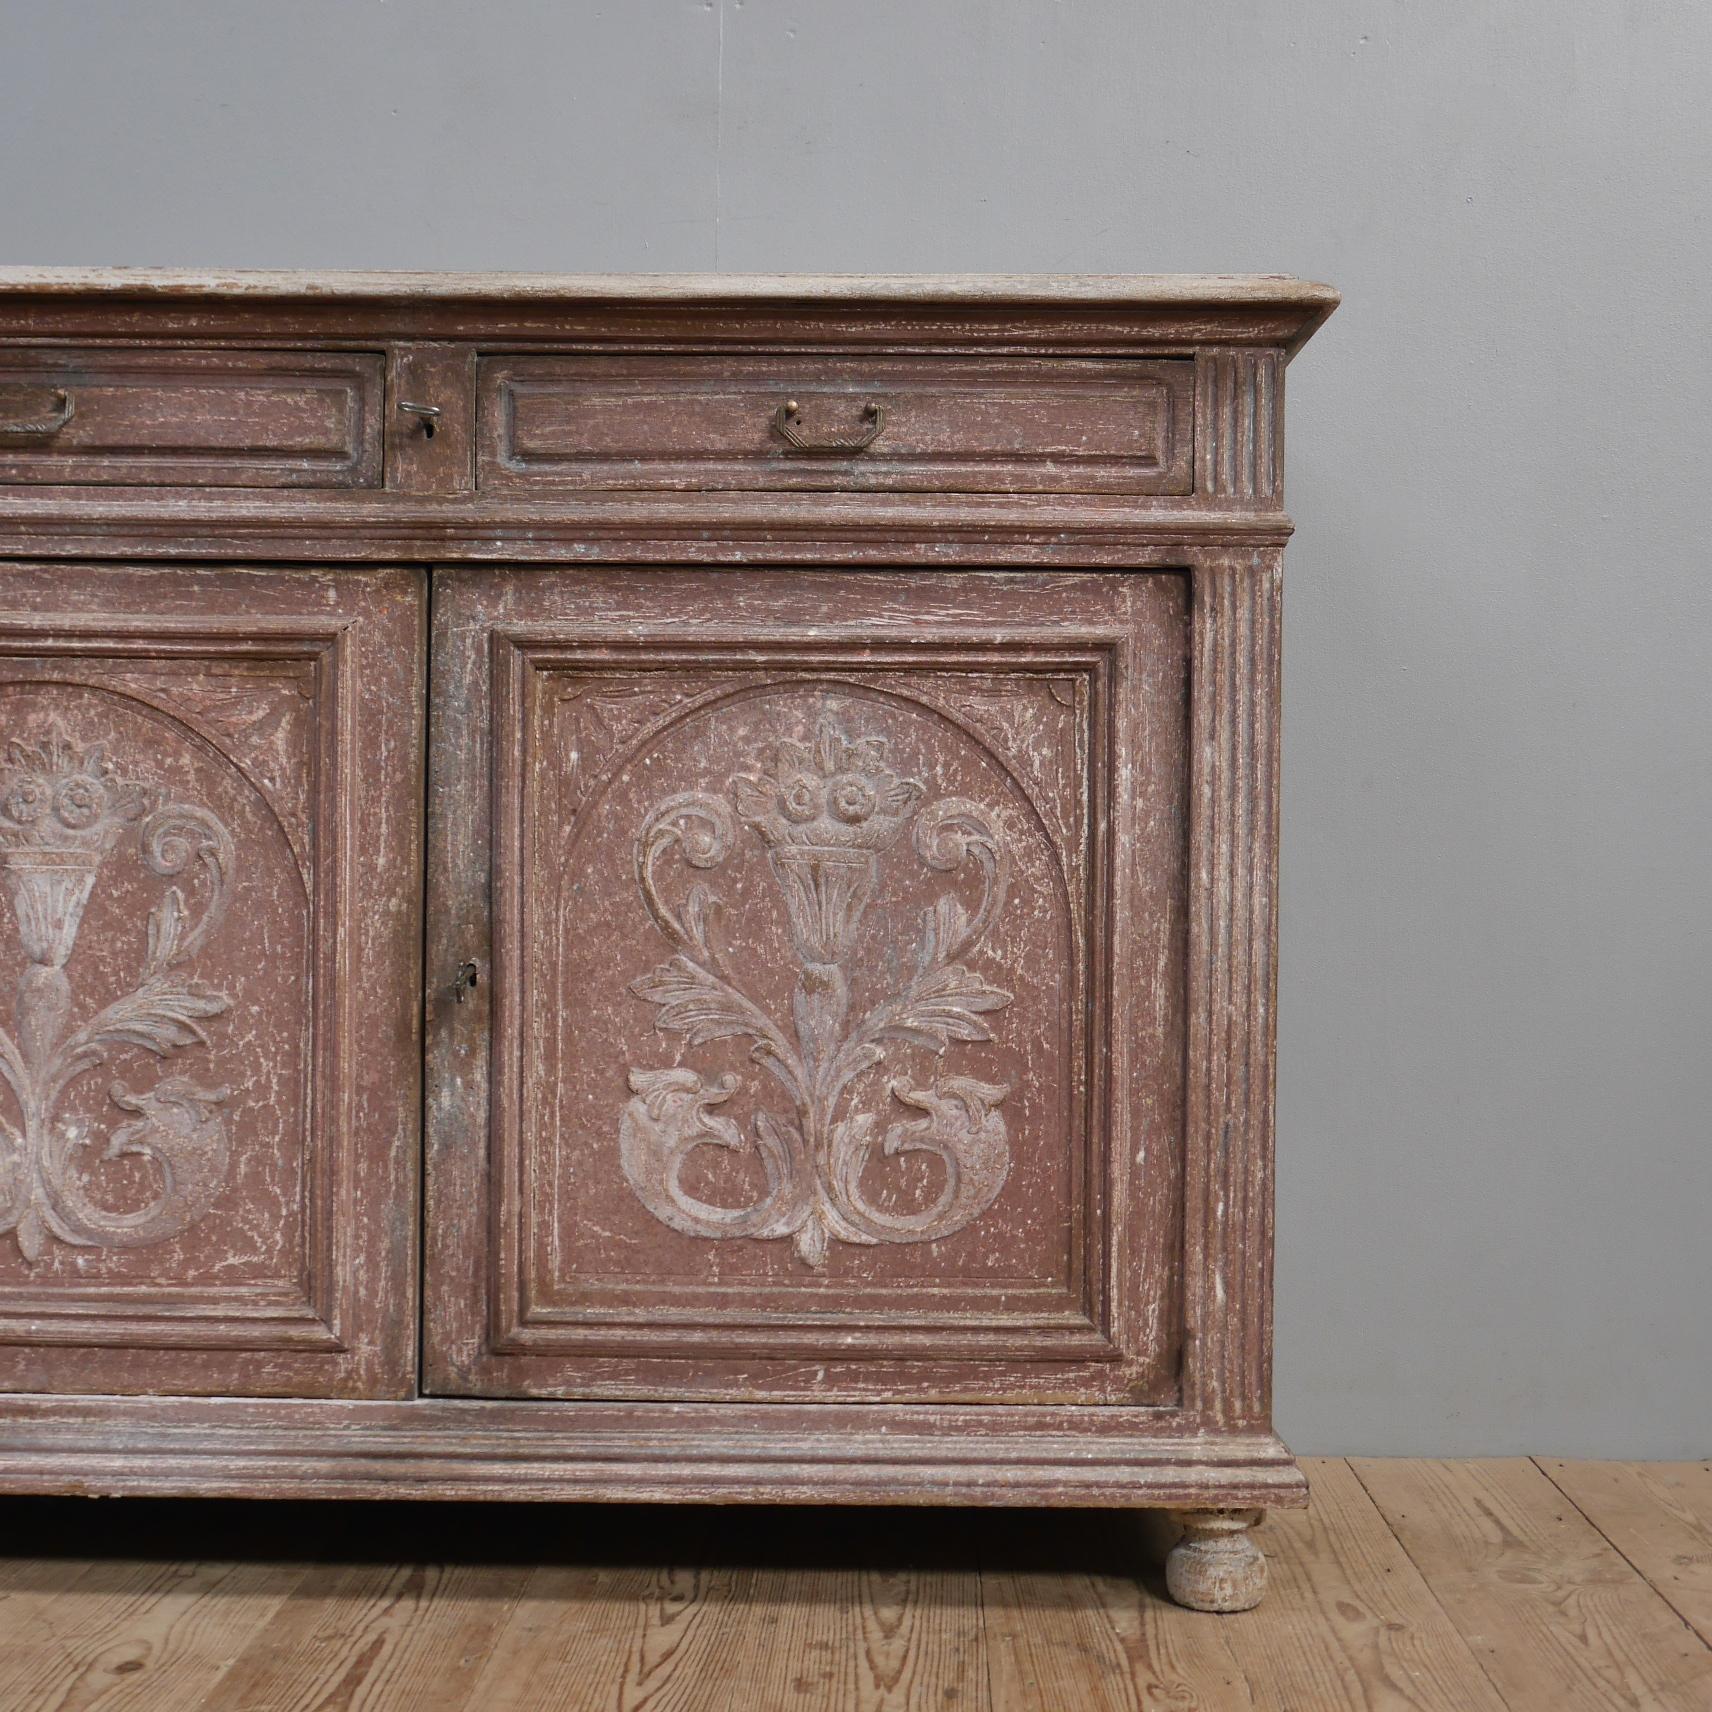 A painted Italian cabinet.
A wonderful piece of furniture in the most remarkable layered & distressed paint. Raised on turned feet, the two door cupboard sits below two shallow drawers with an unusual locking mechanism & working key. The door fronts